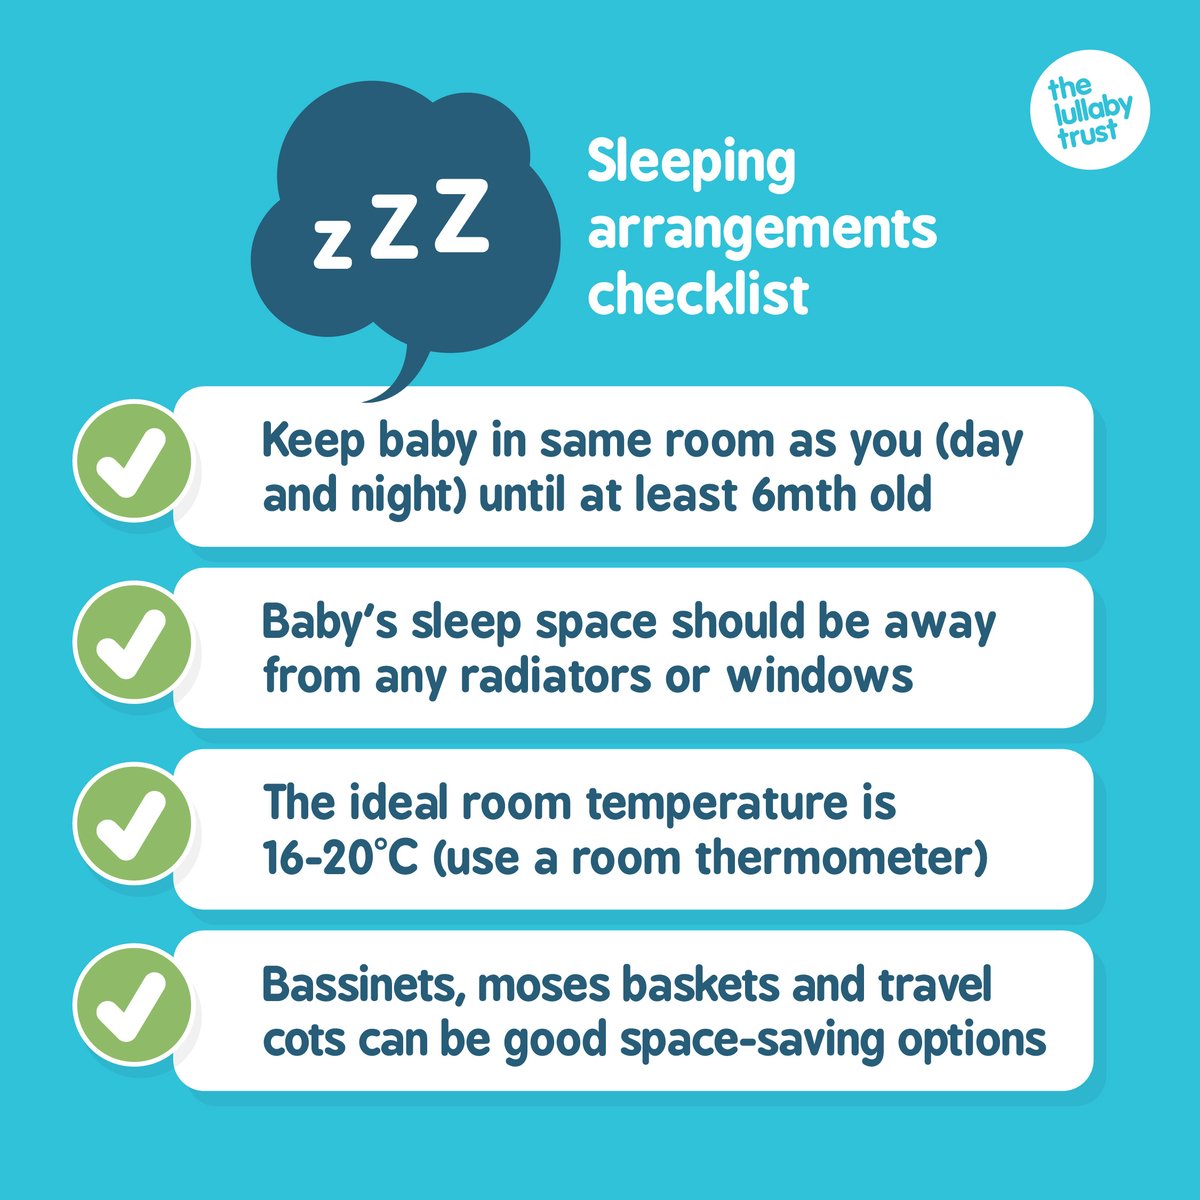 Sleeping arrangements checklist 😴 Whether you’re setting up a room in preparation for your baby arriving, or you’re going on holiday and need to work out where everyone will sleep while you’re away, this is the checklist for you!